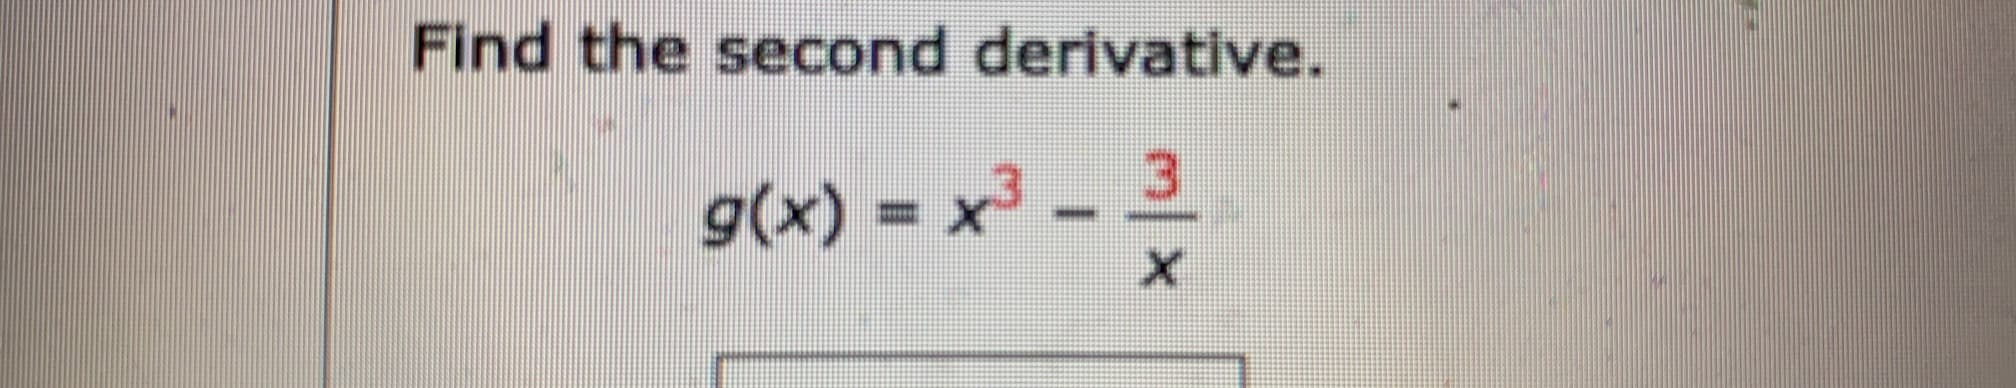 Find the second derivative.
g(x) = x3 - 3
